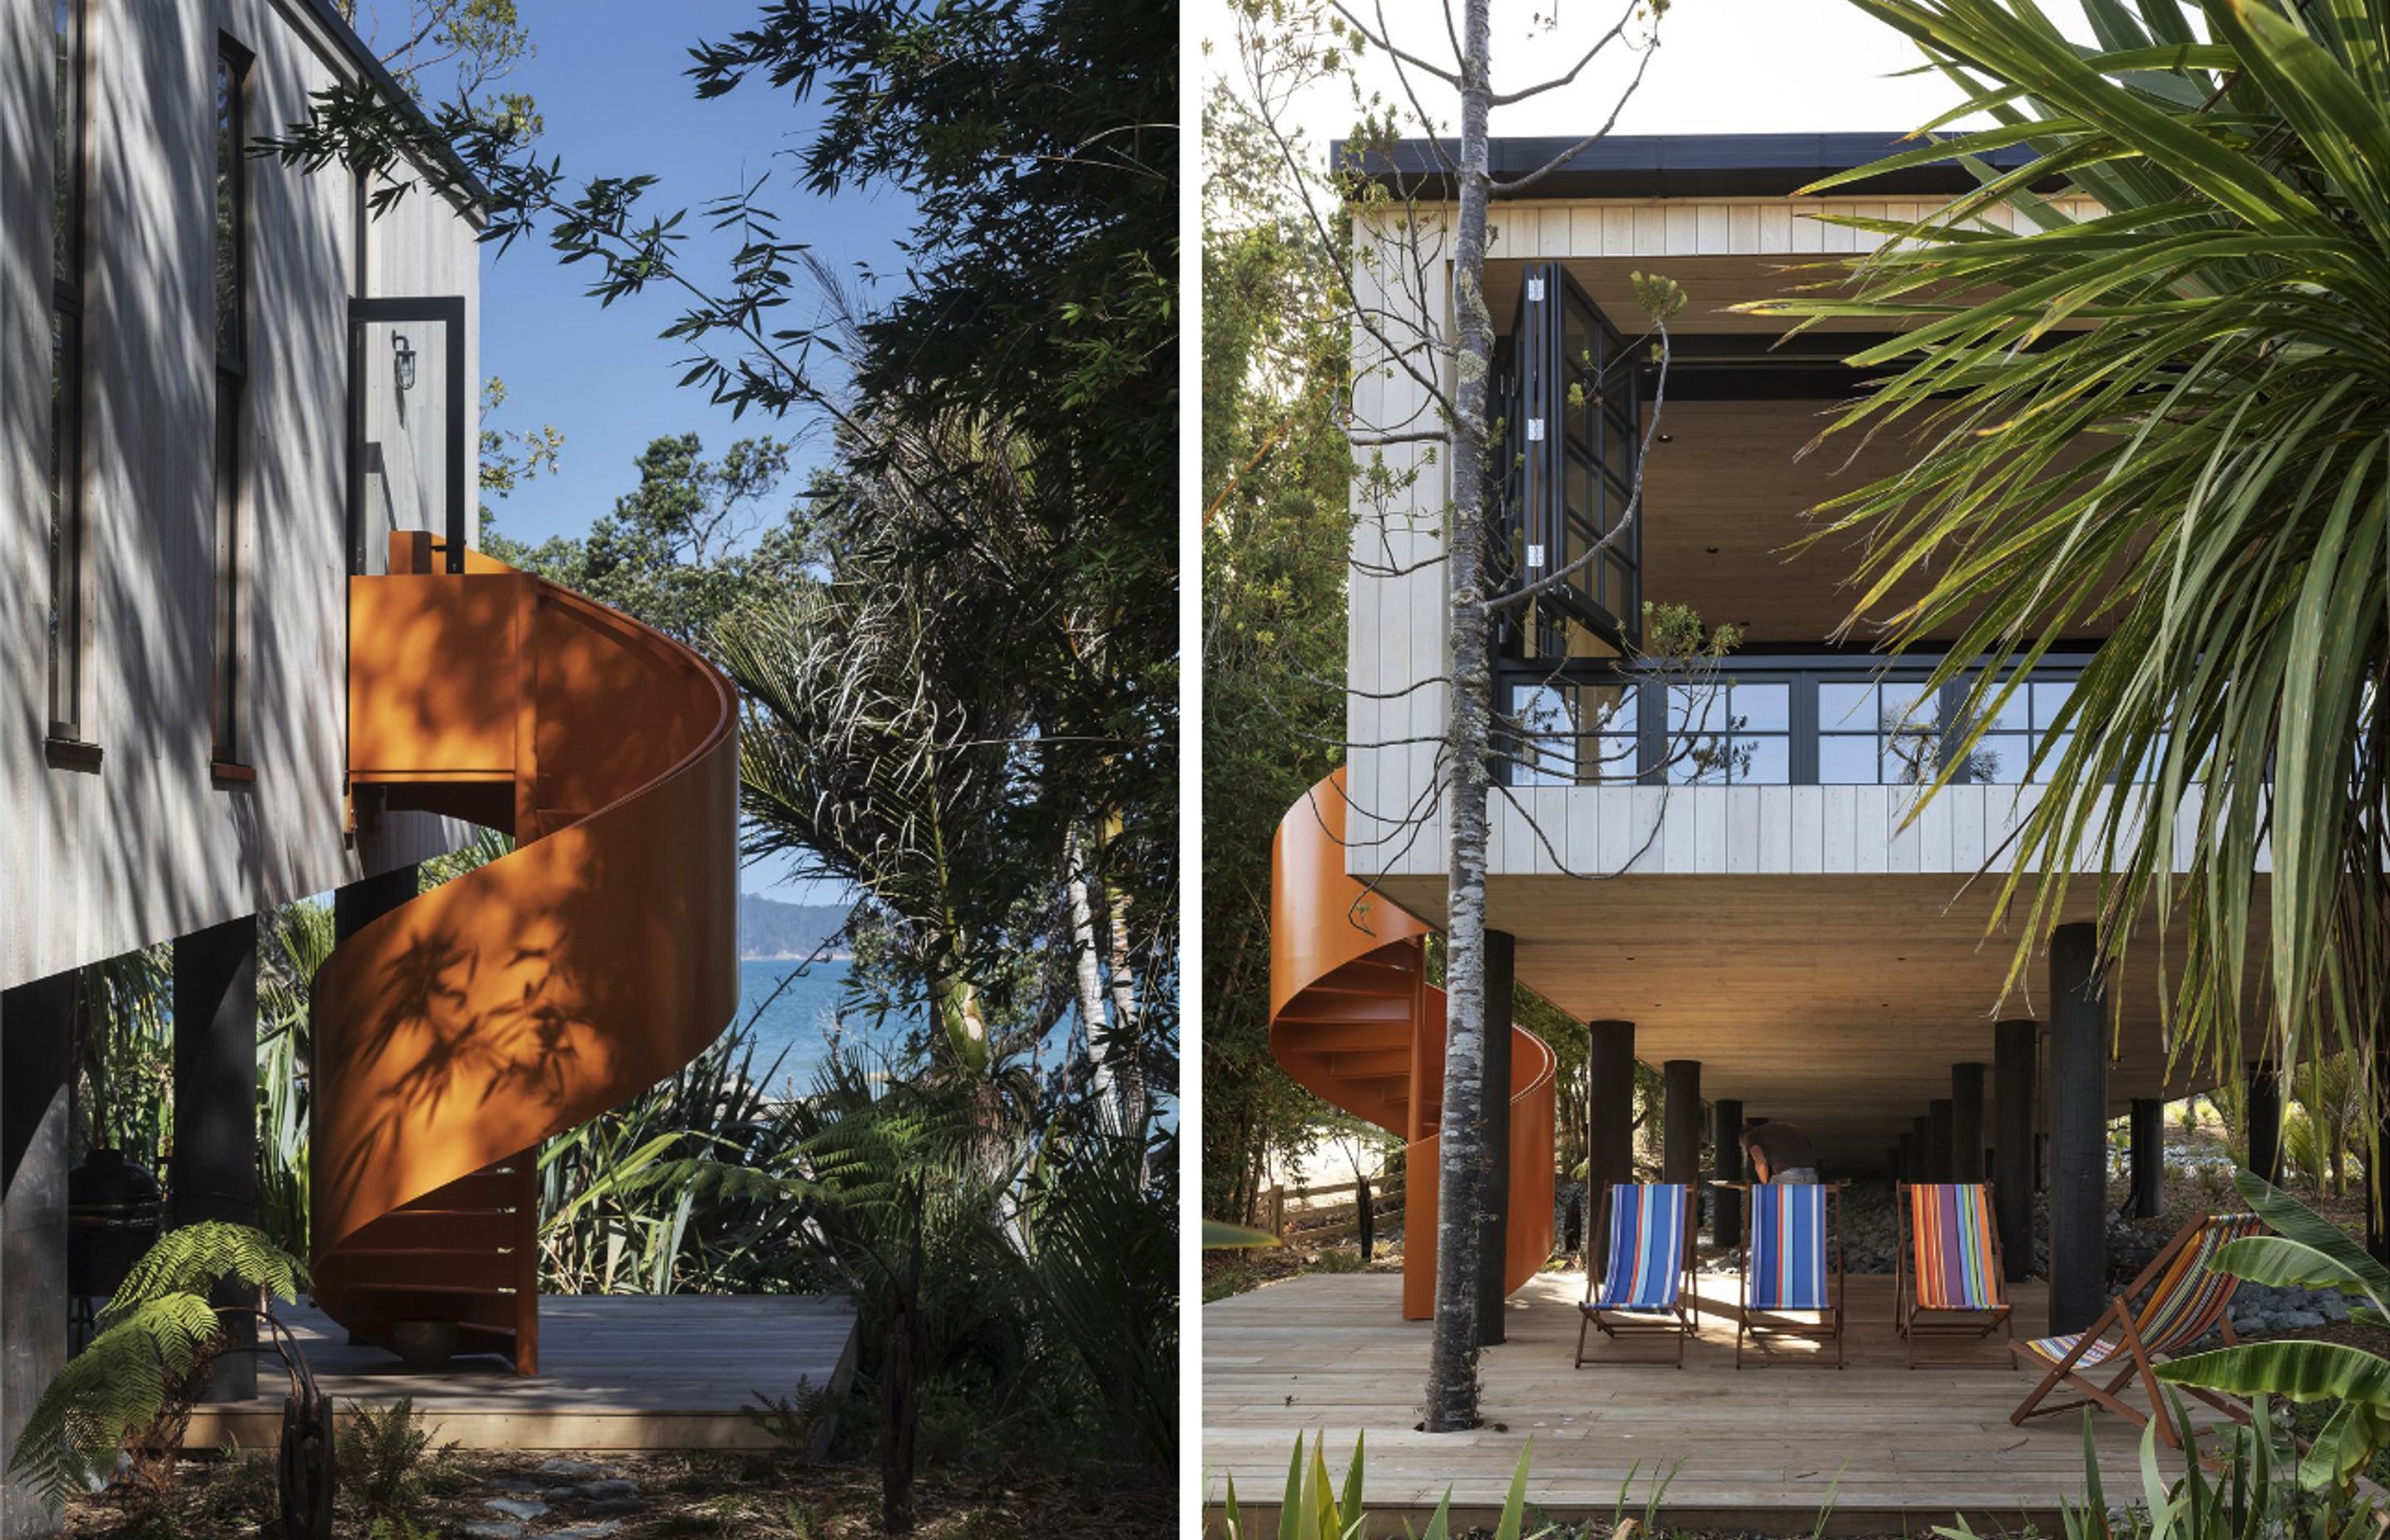 The striking spiral staircase leads to the outdoor living area, sitting amongst the stilts that elevate the house.